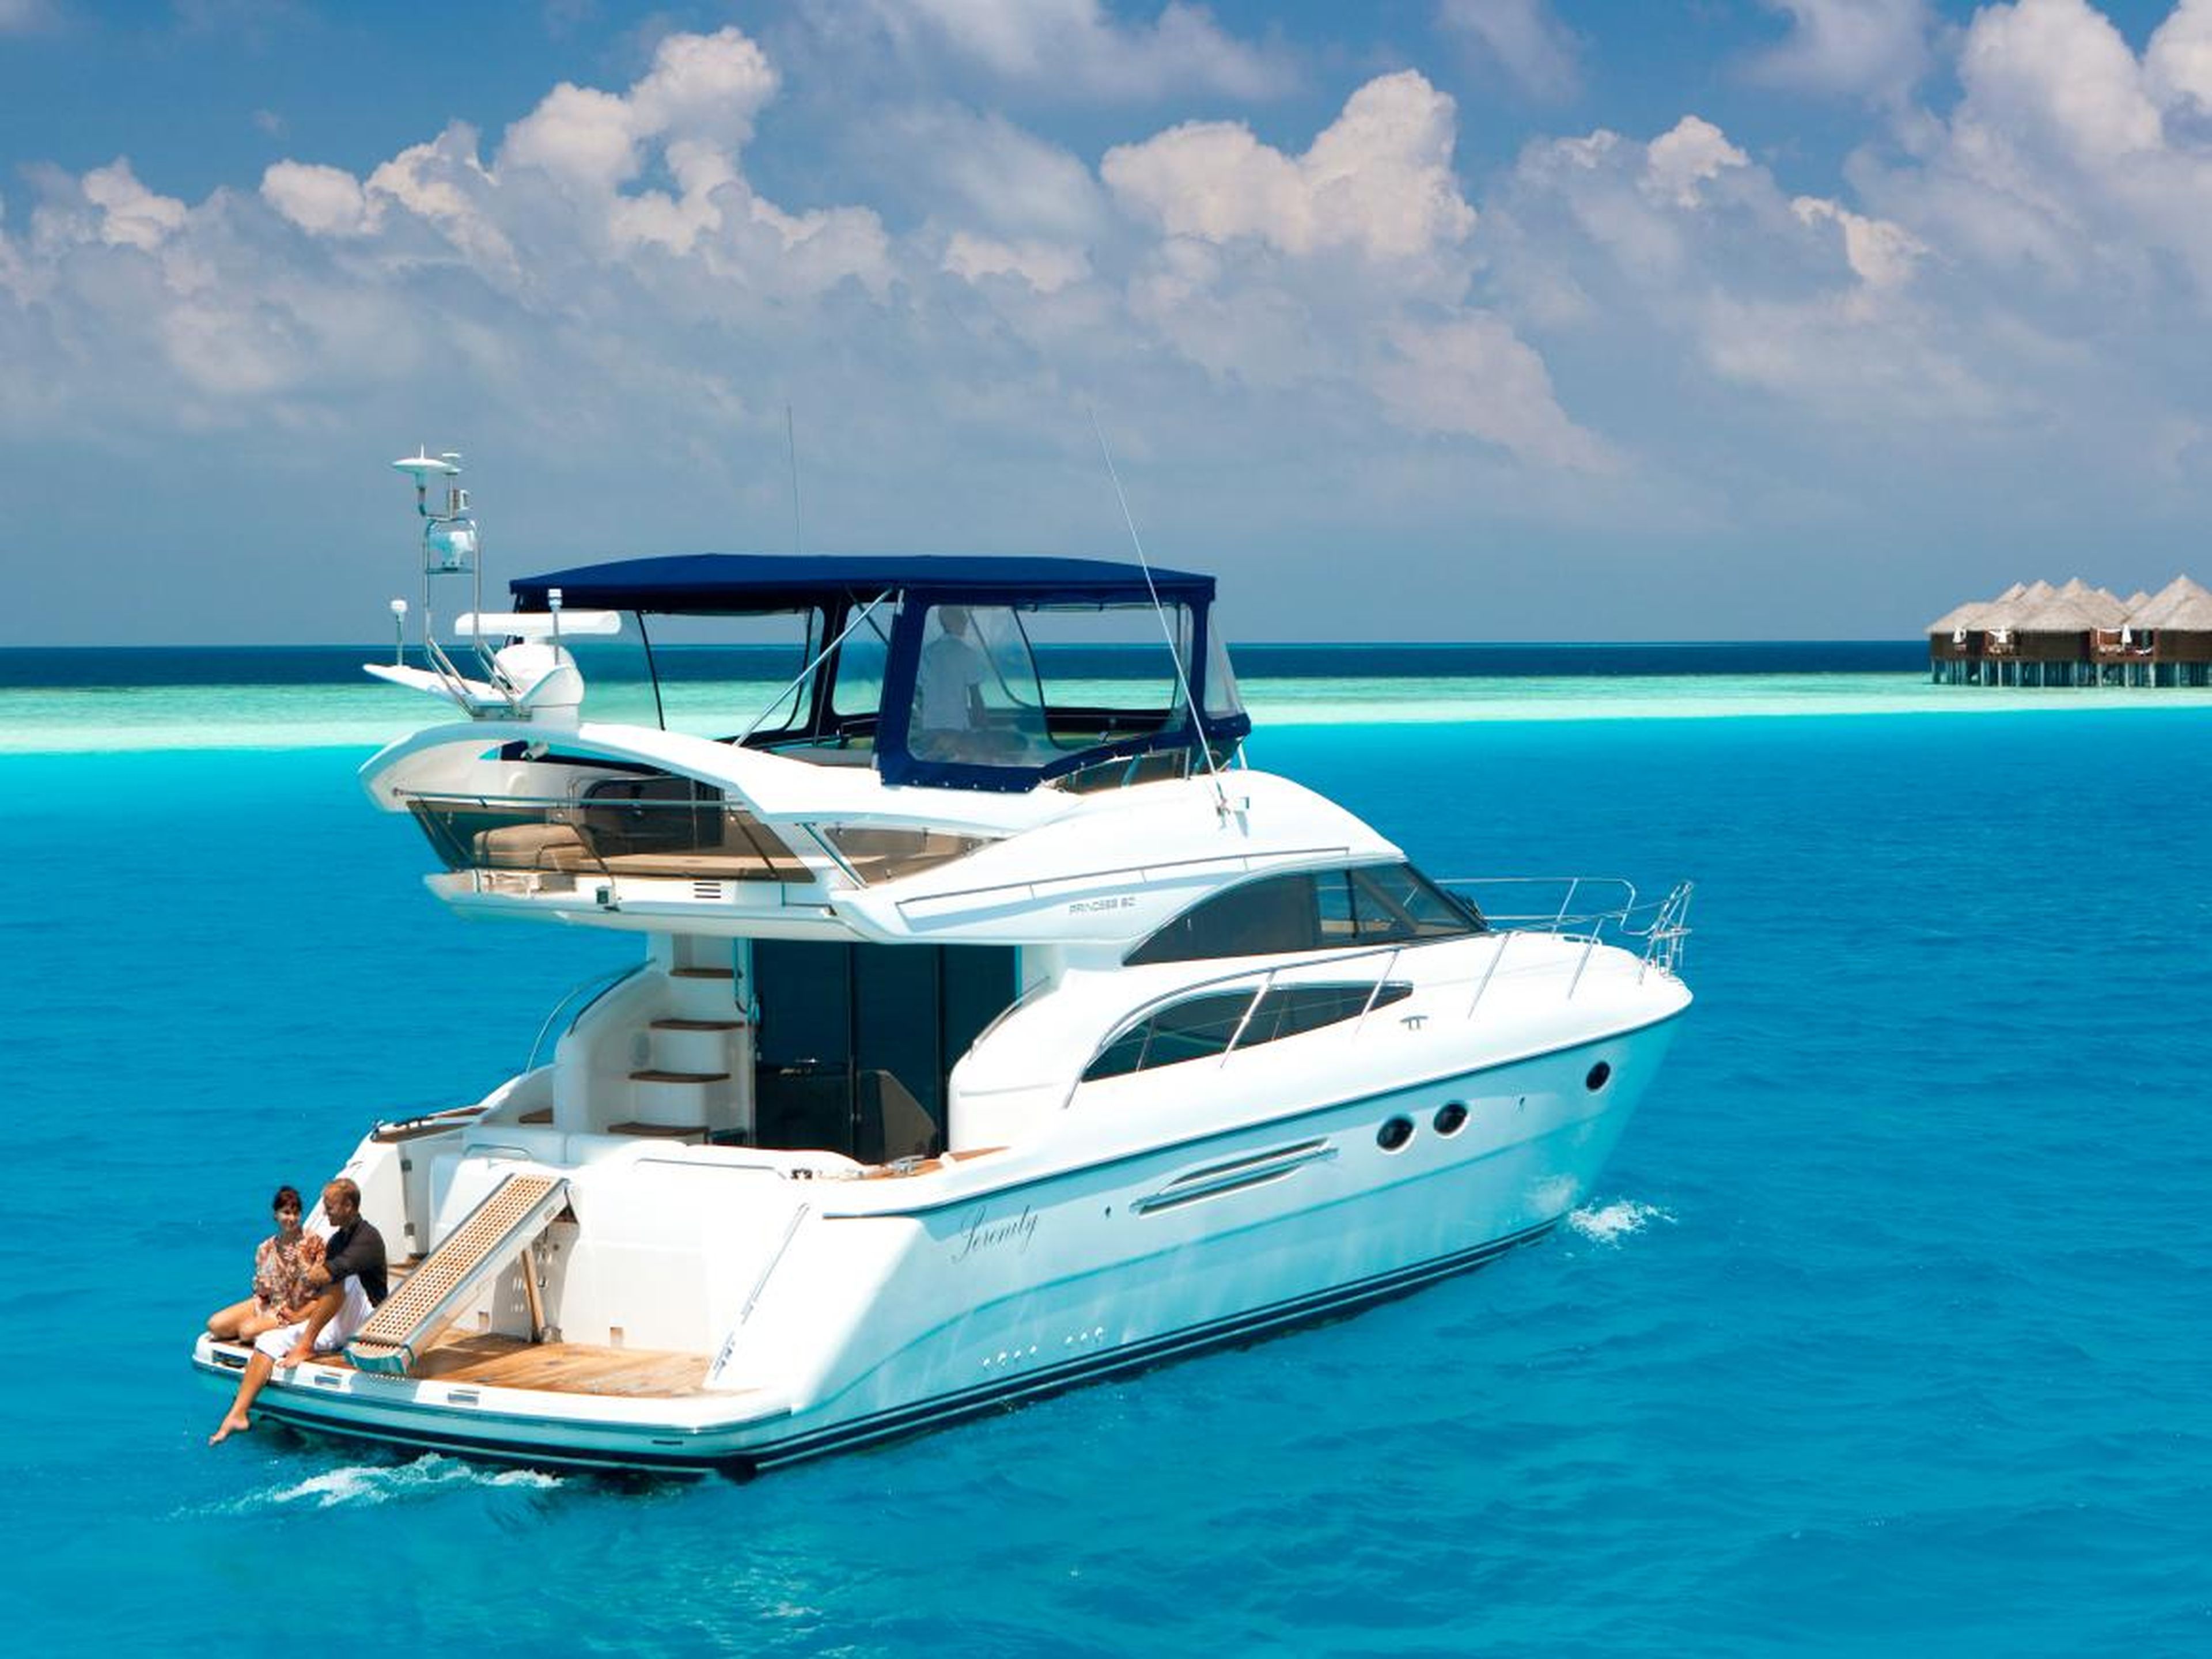 Resort guests can embark on various boat excursions, from a romantic cruise on the resort's luxury yacht, Serenity ...